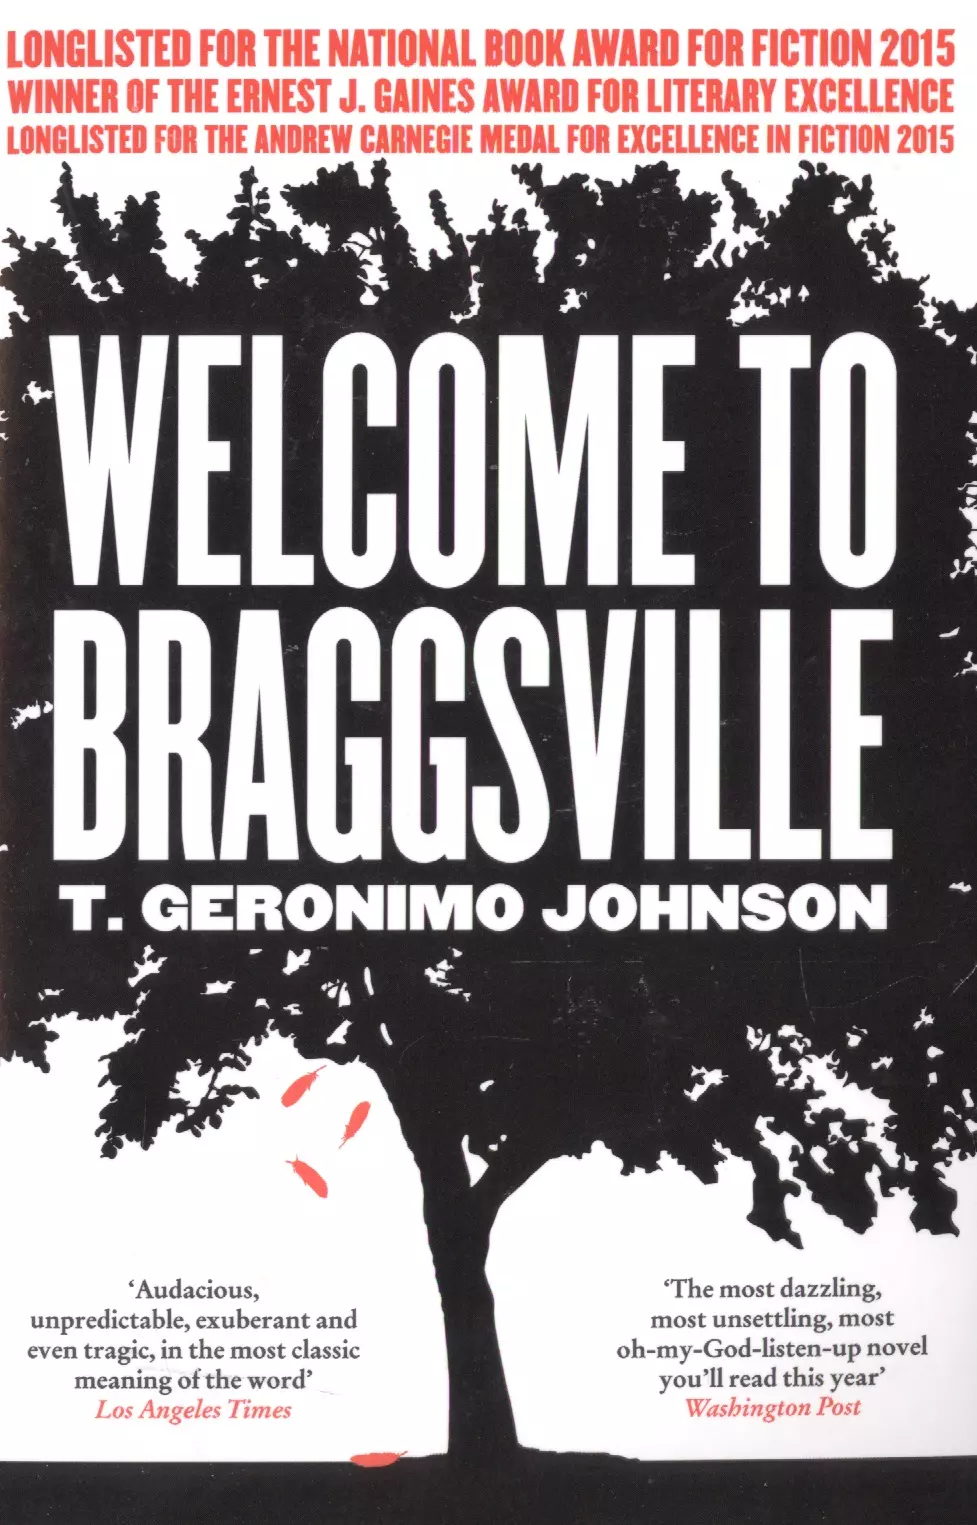  - Welcome to Braggsville